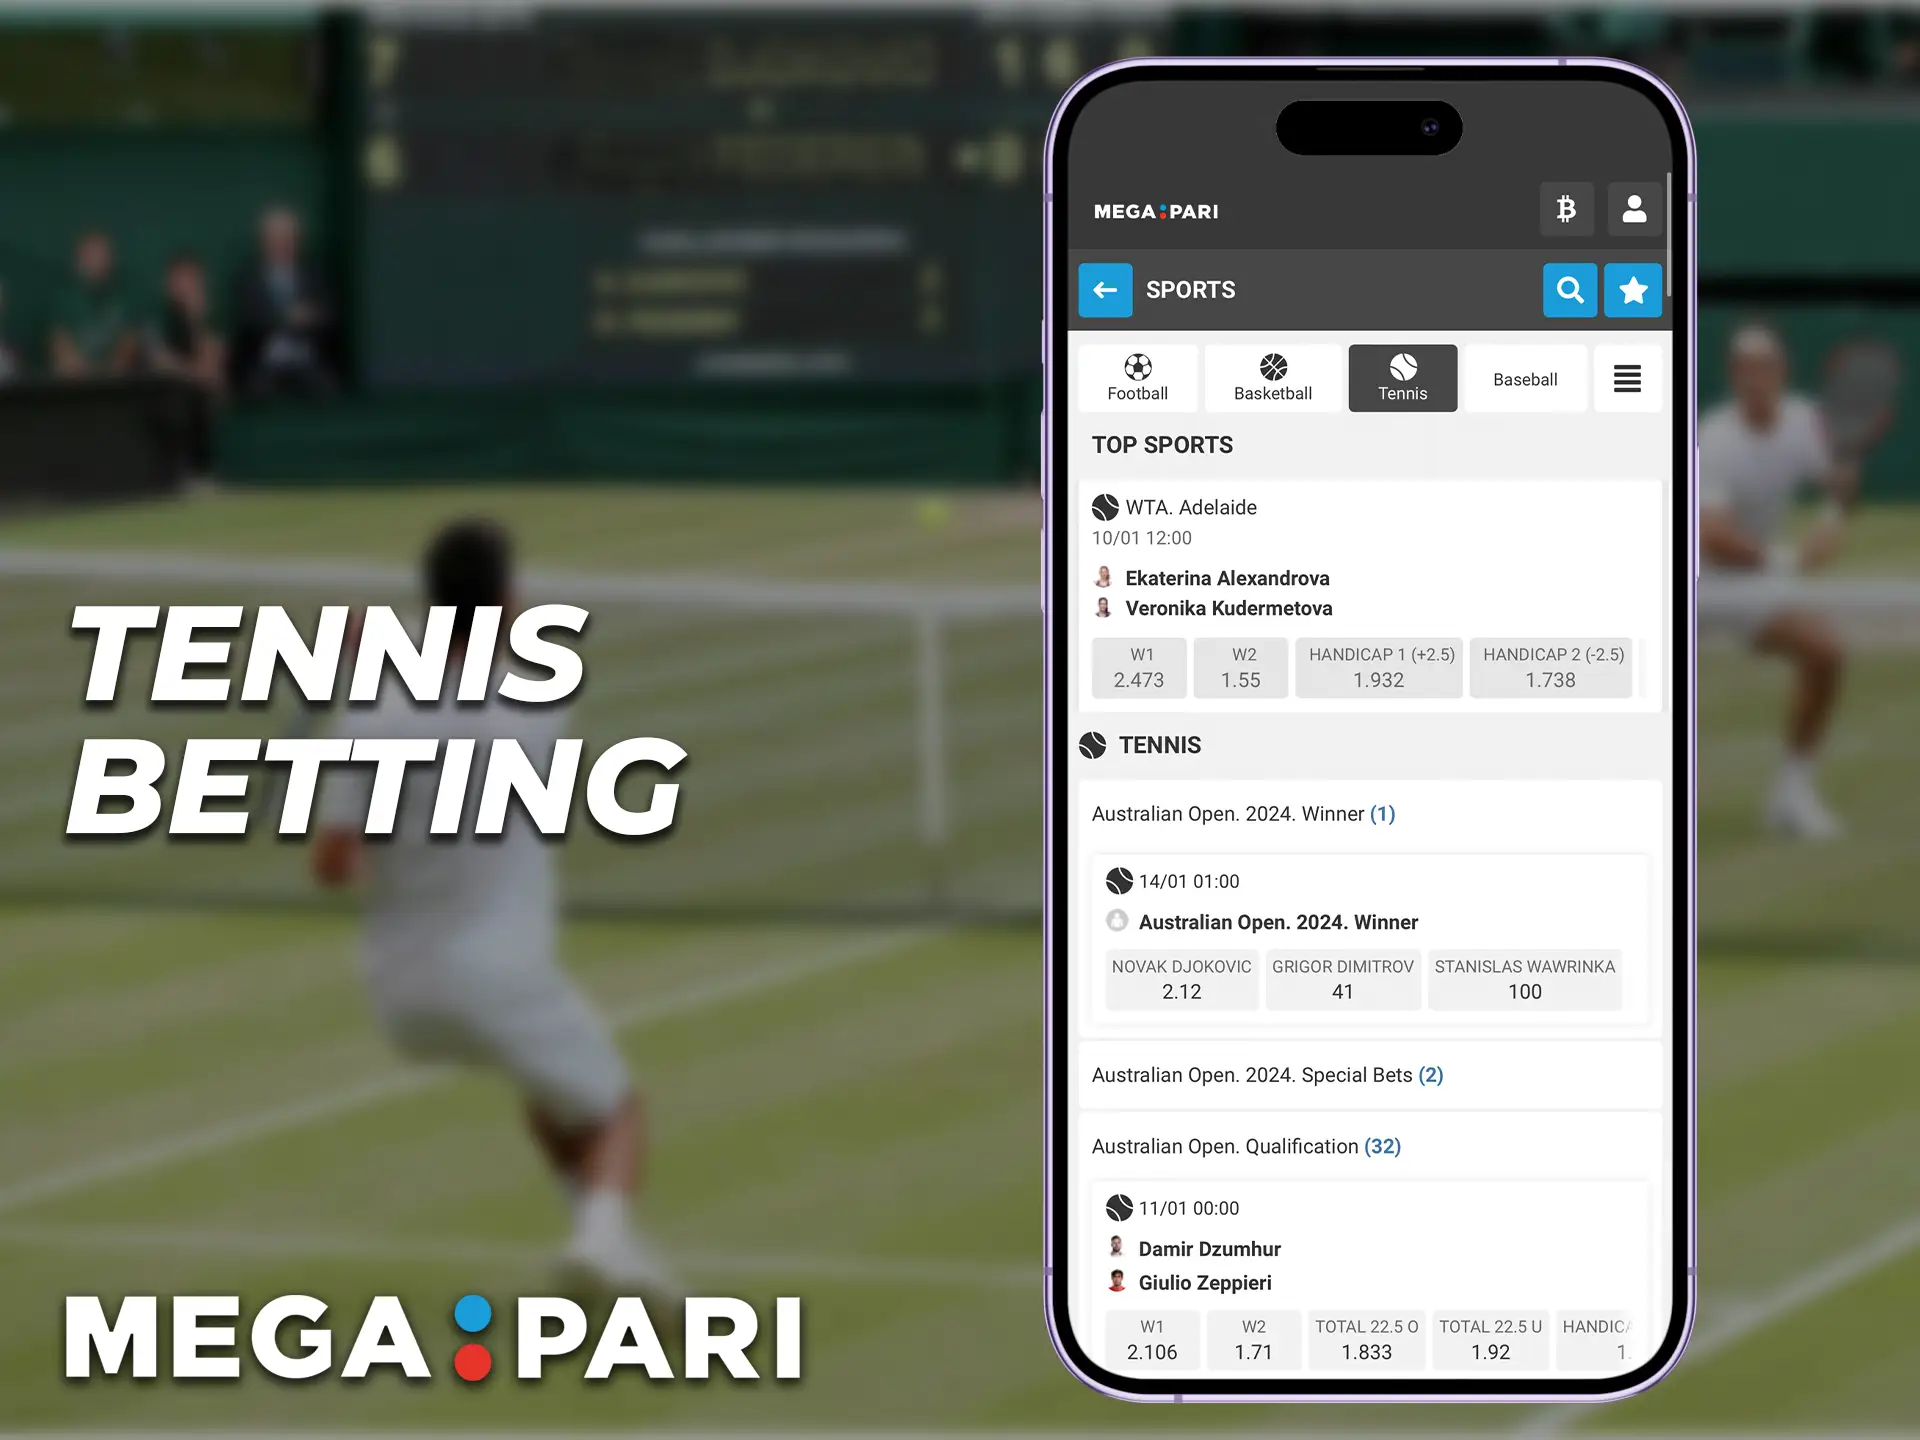 More than 20 tournaments are presented in the Megapari mobile app for tennis betting.